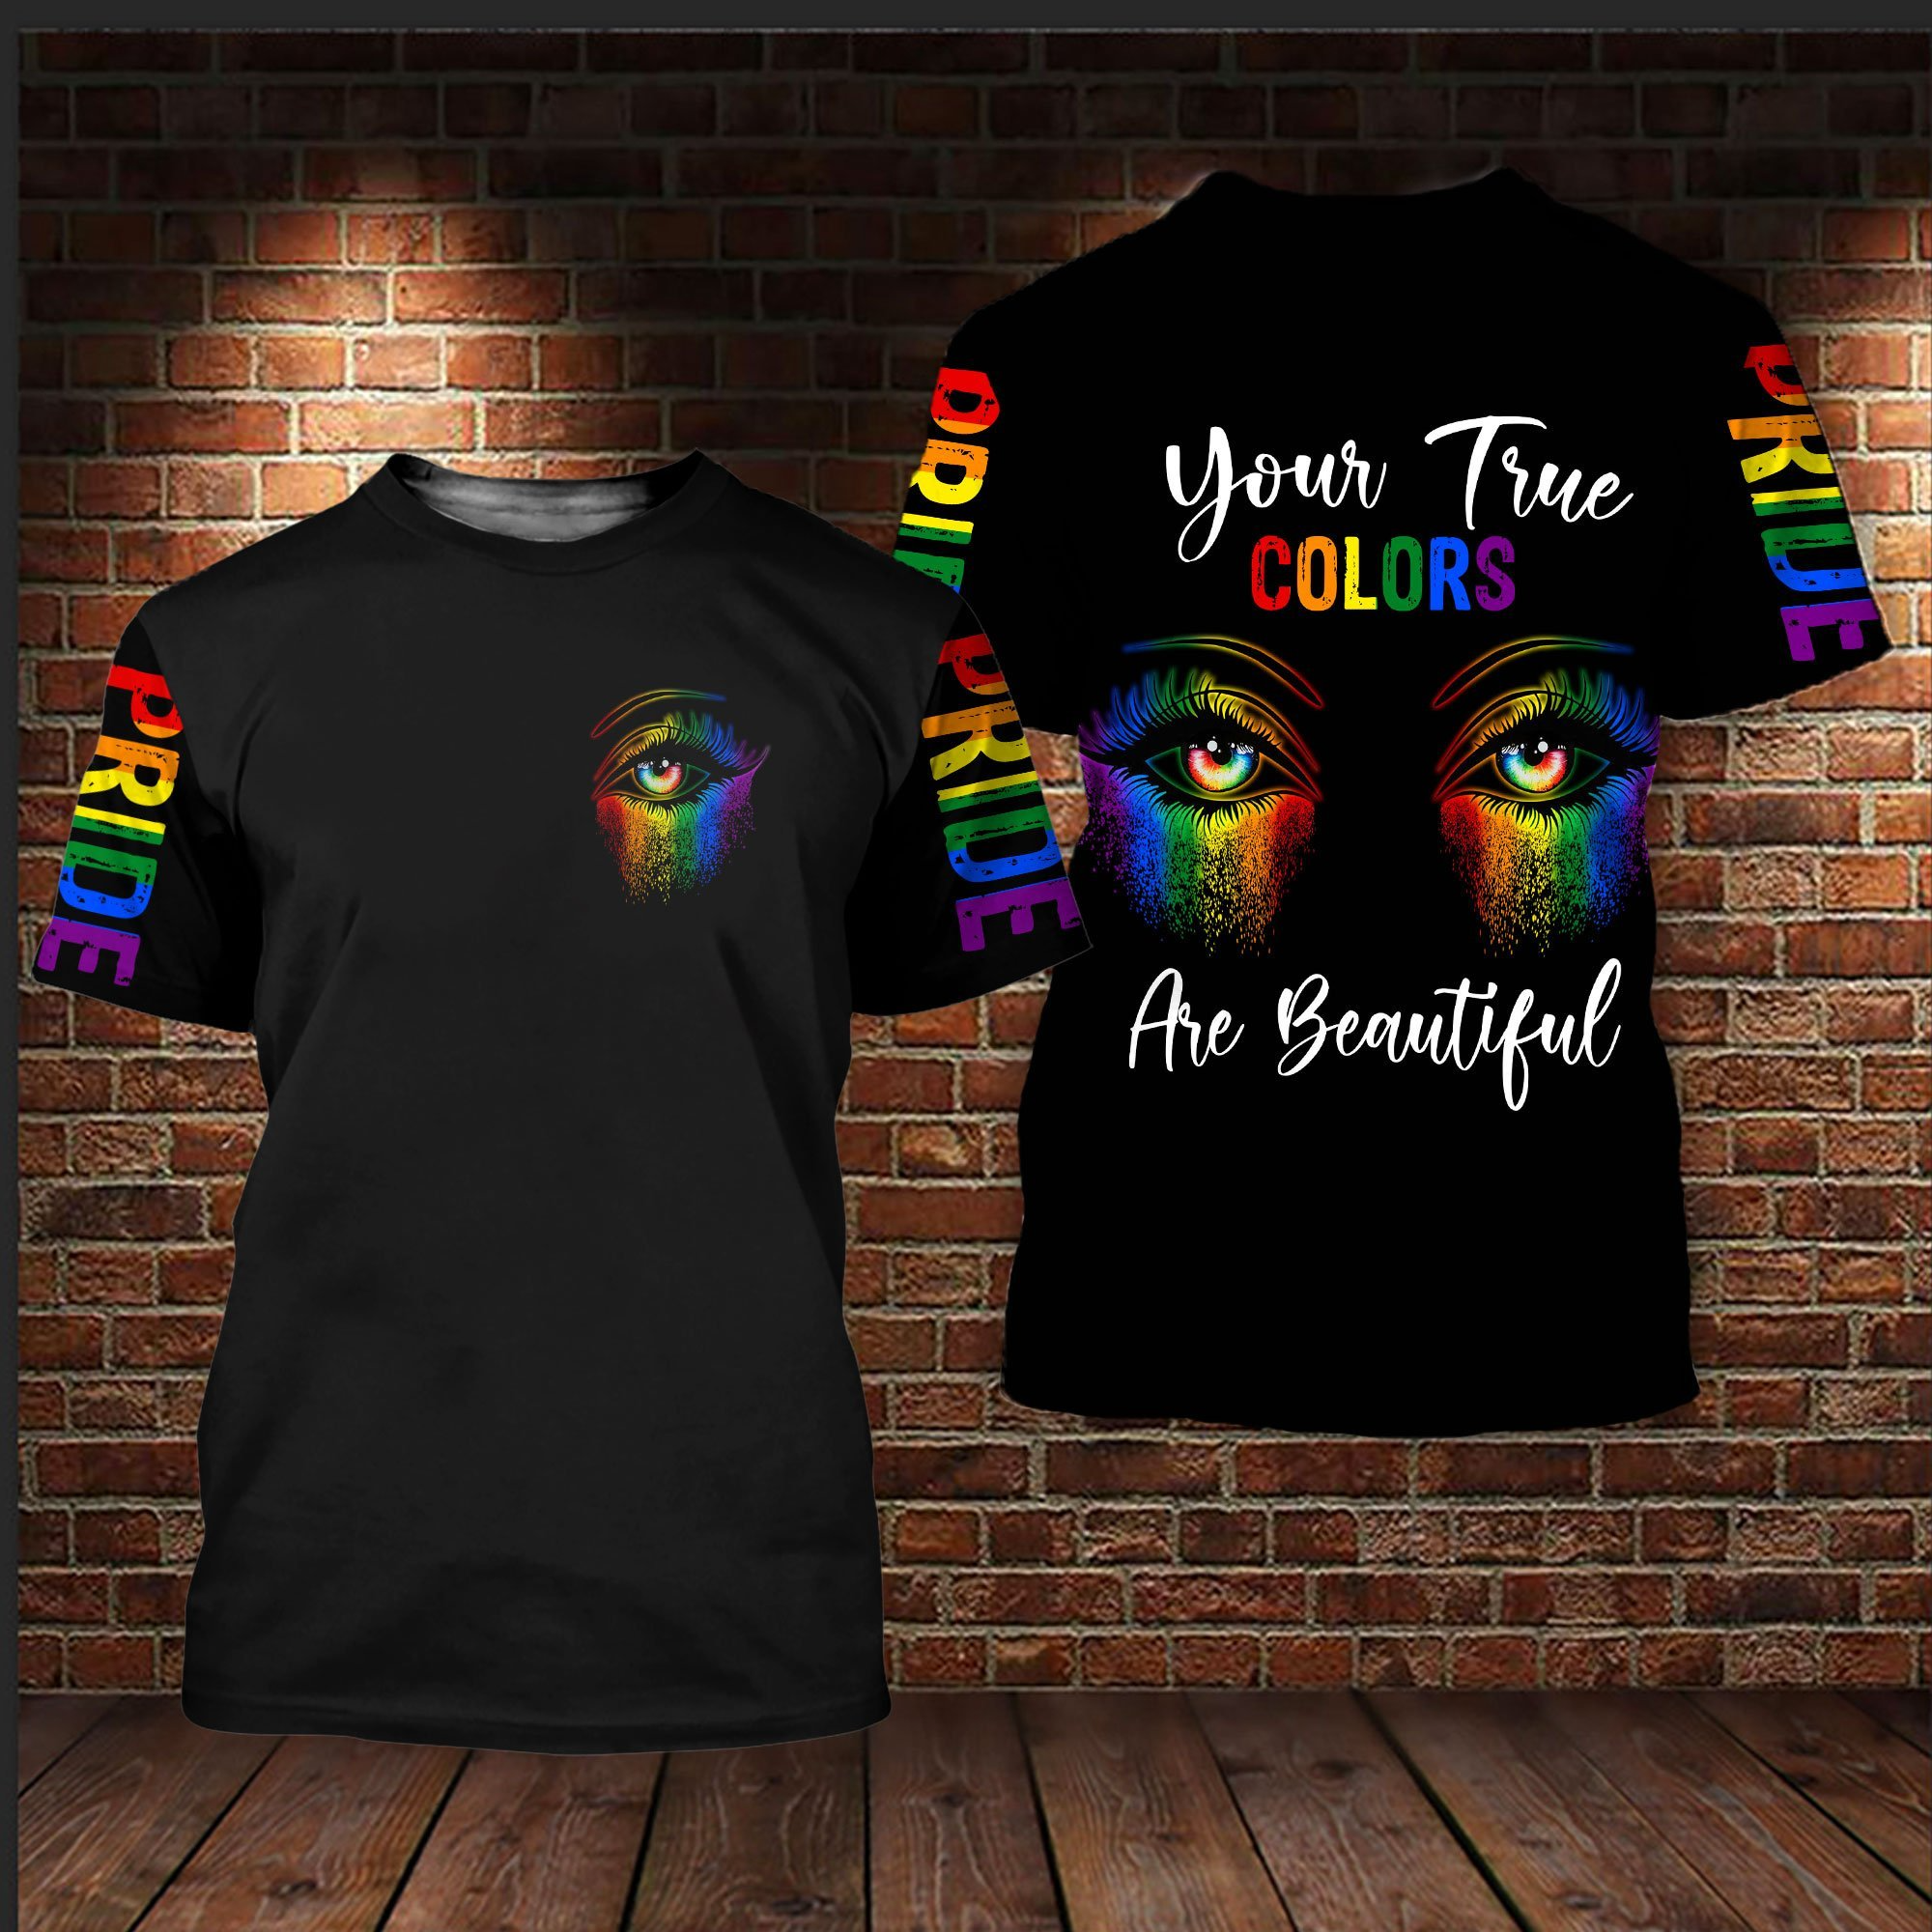 Lesbian Shirt/ LGBT Pride/ Gift For Happy LGBT History Month/ T Shirt For Queer LGBT/ Bisexual Shirt